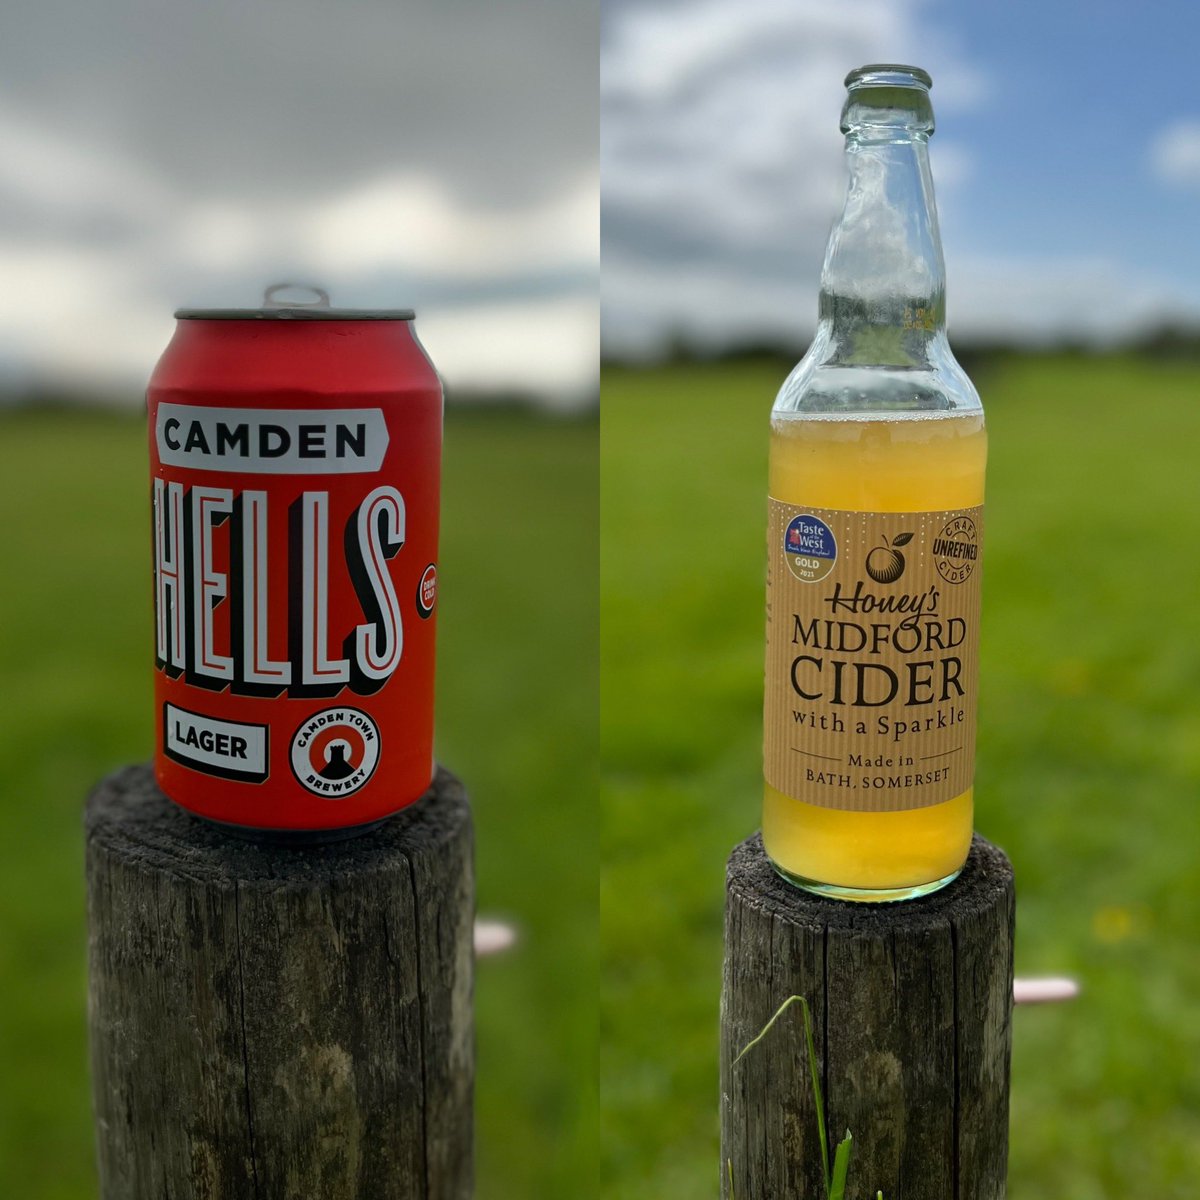 Gone camping with a couple of my favourites 👌🏻 @CamdenBrewery @HoneysCider